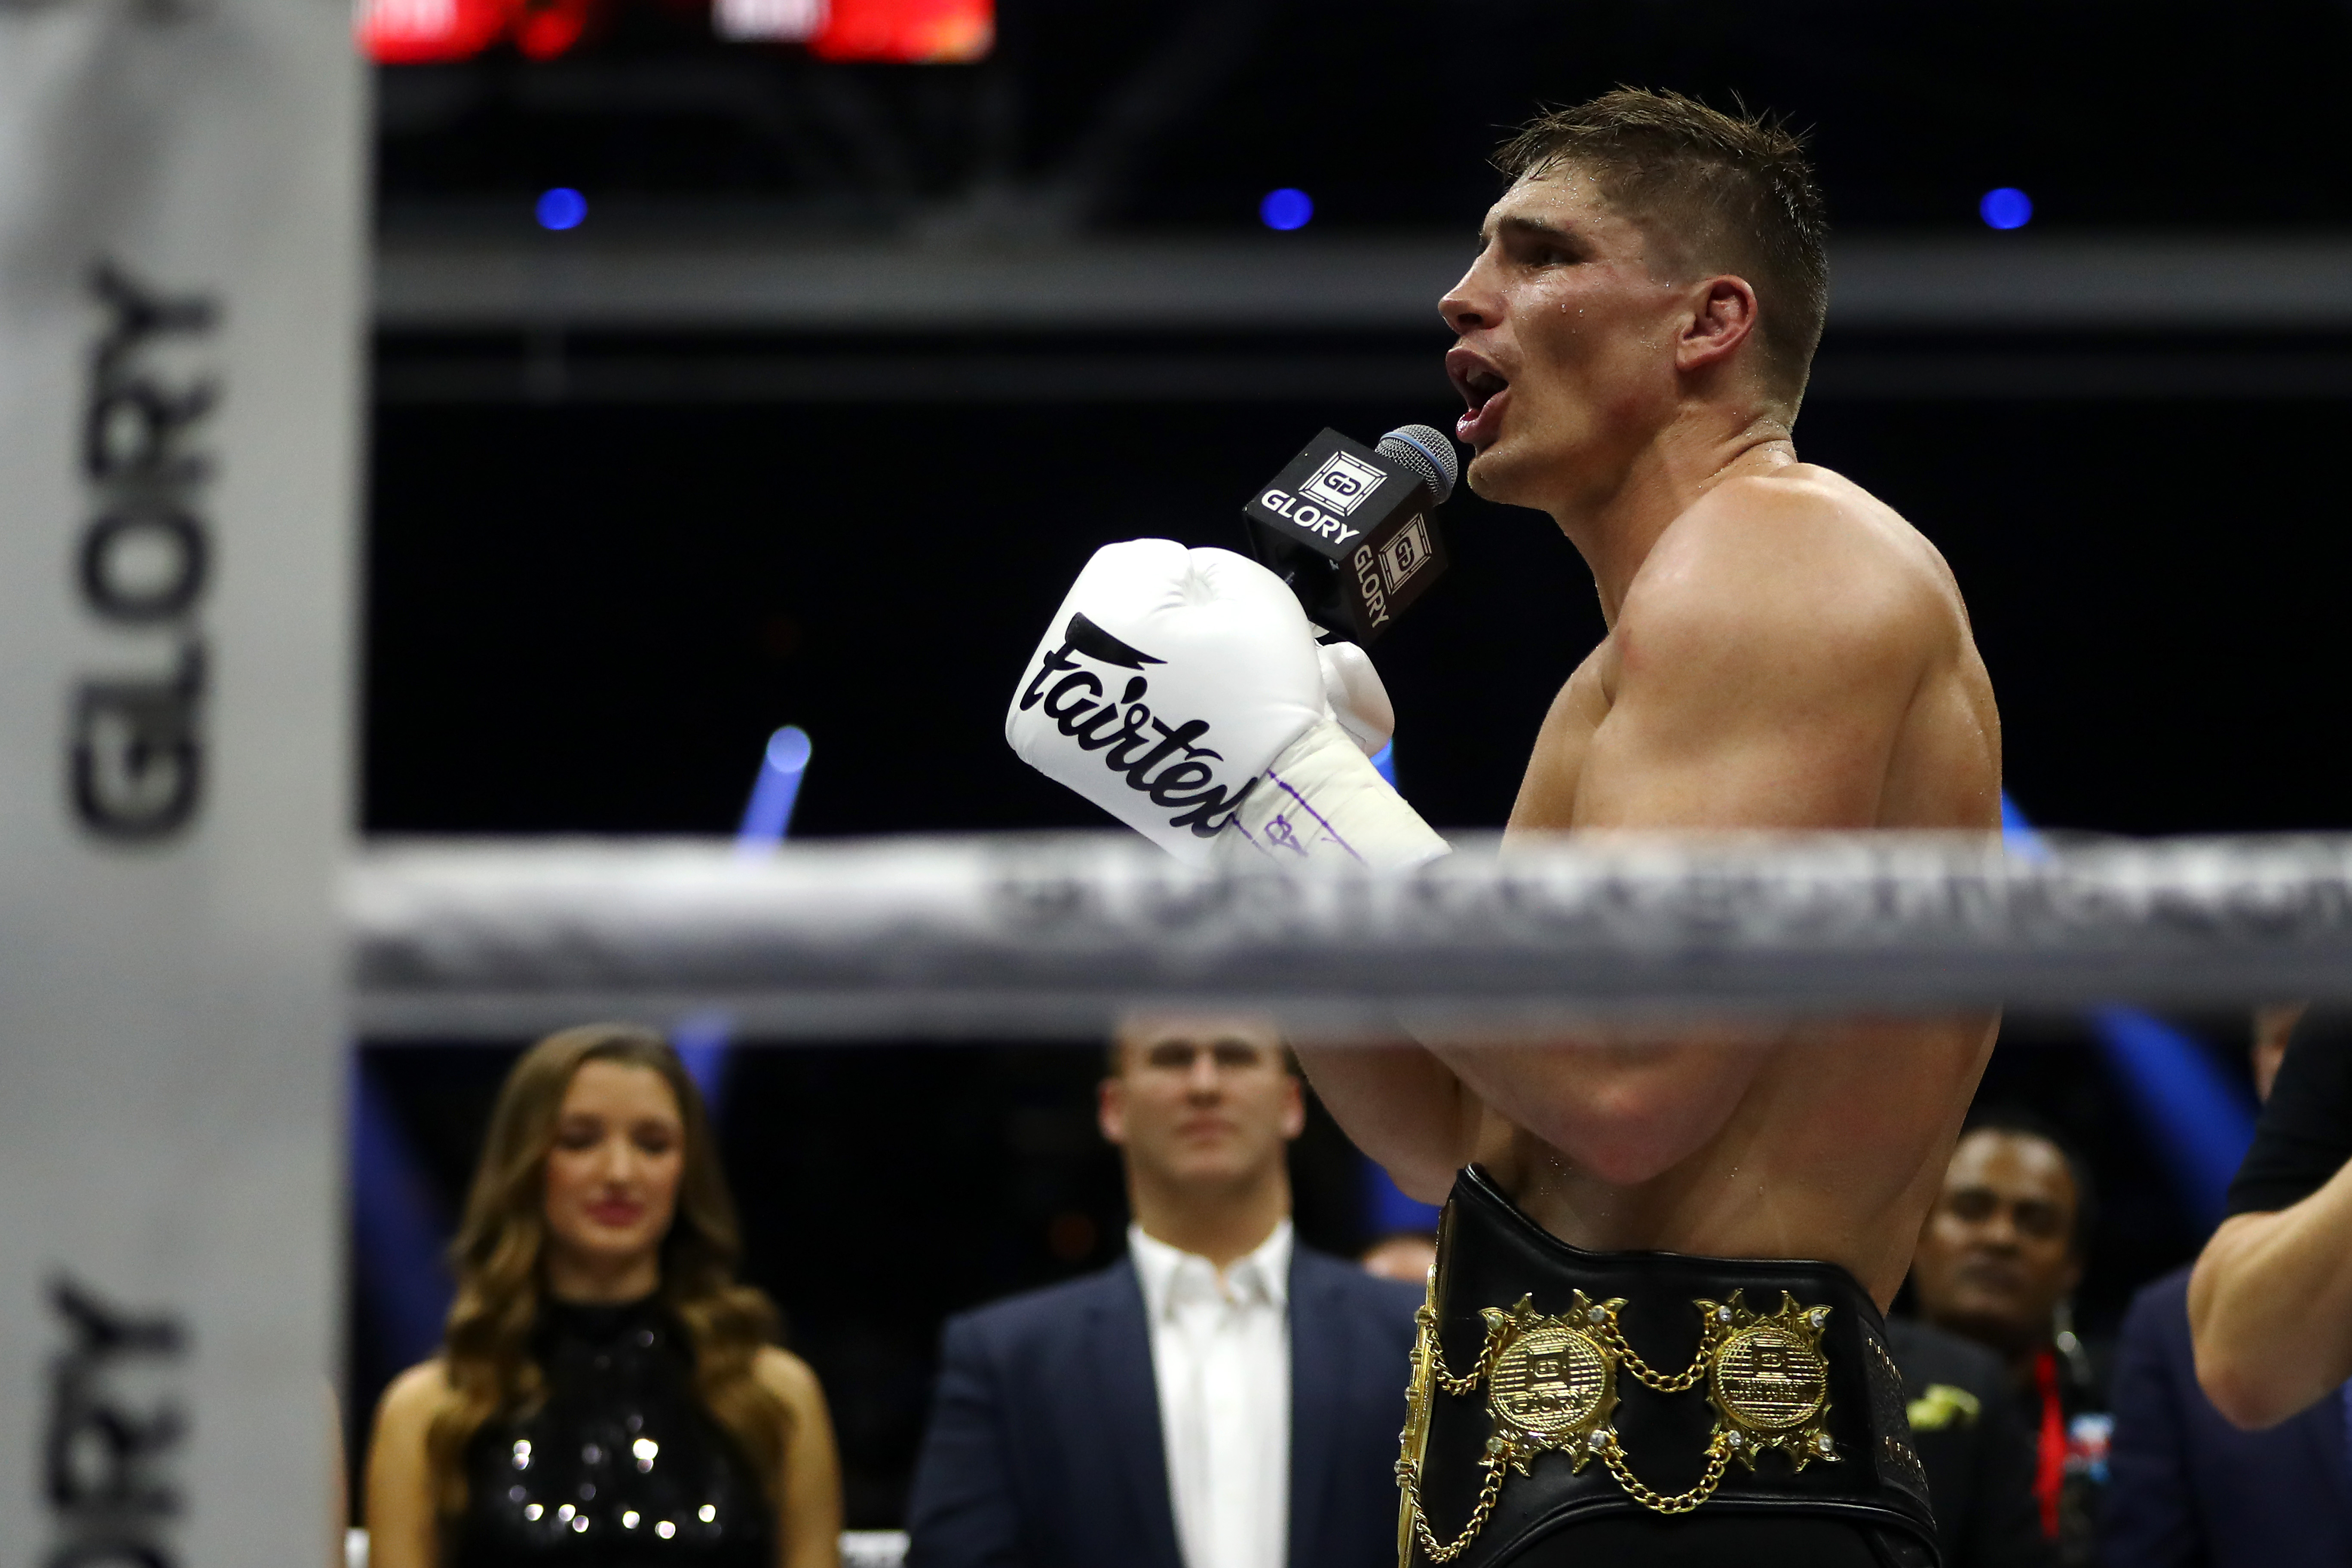 Rico Verhoeven speaks to the fans after retaining his GLORY heavyweight belt against Badr Hari.